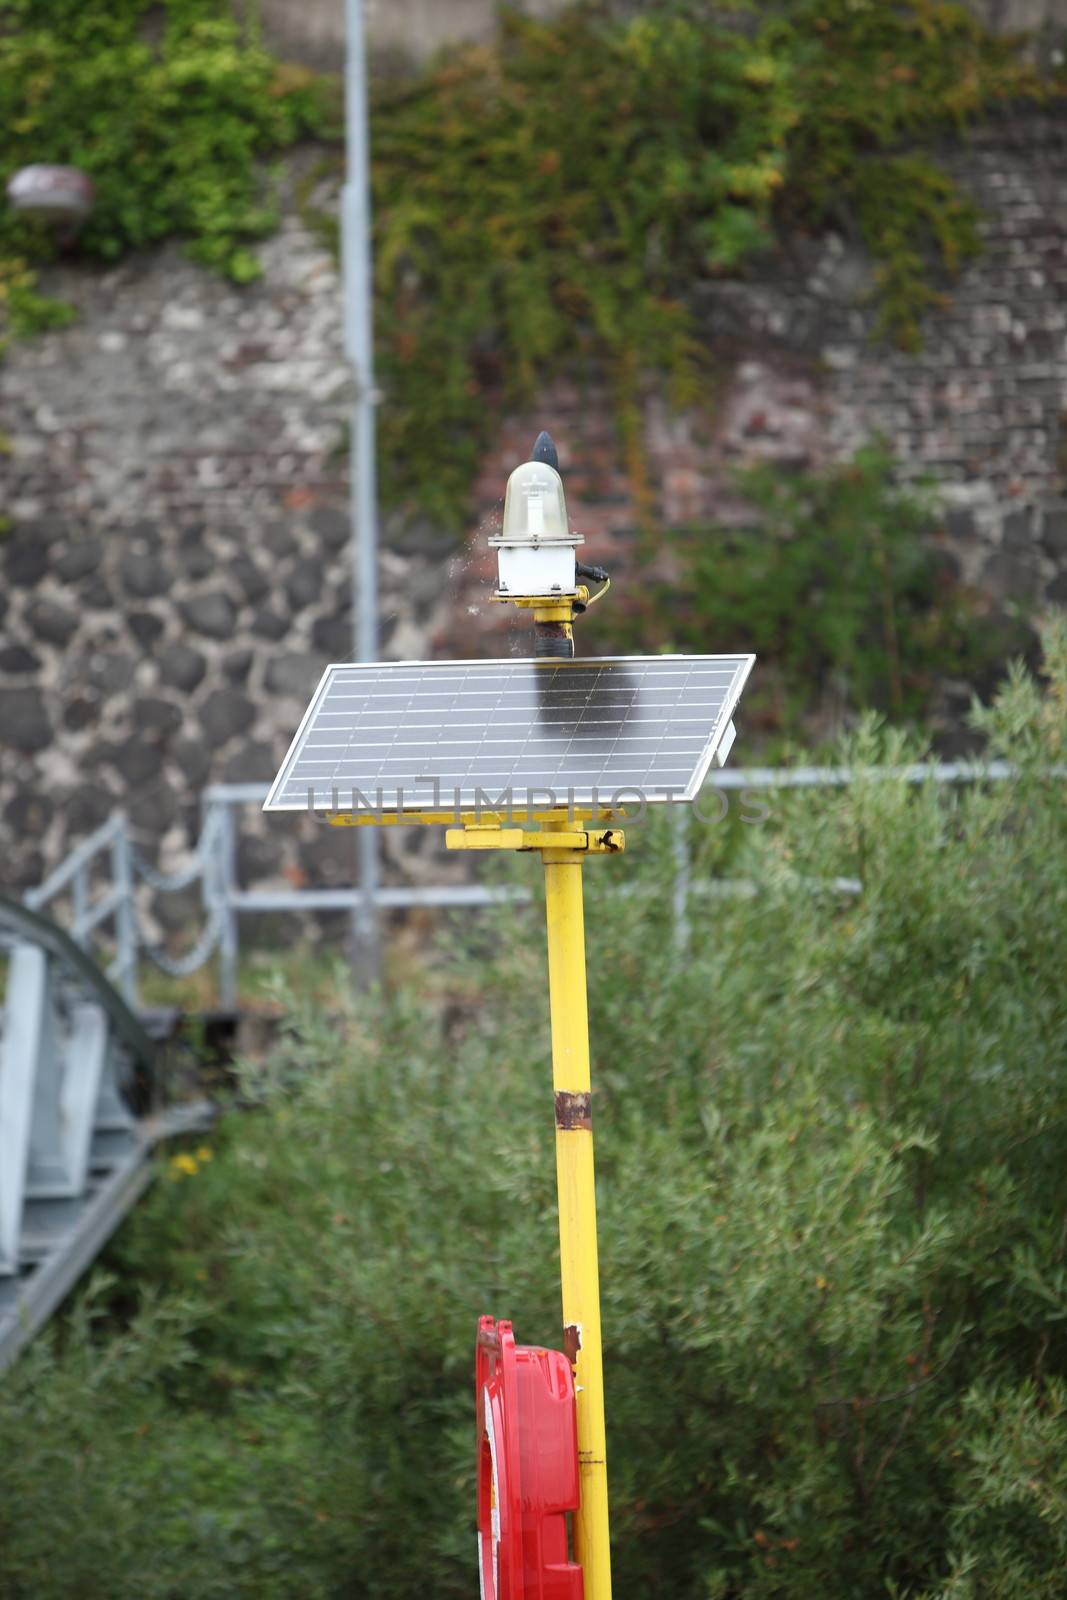 Solar powered portable light with a battery to store the converted electrical power used as a warning light for traffic or to warn of a hazard